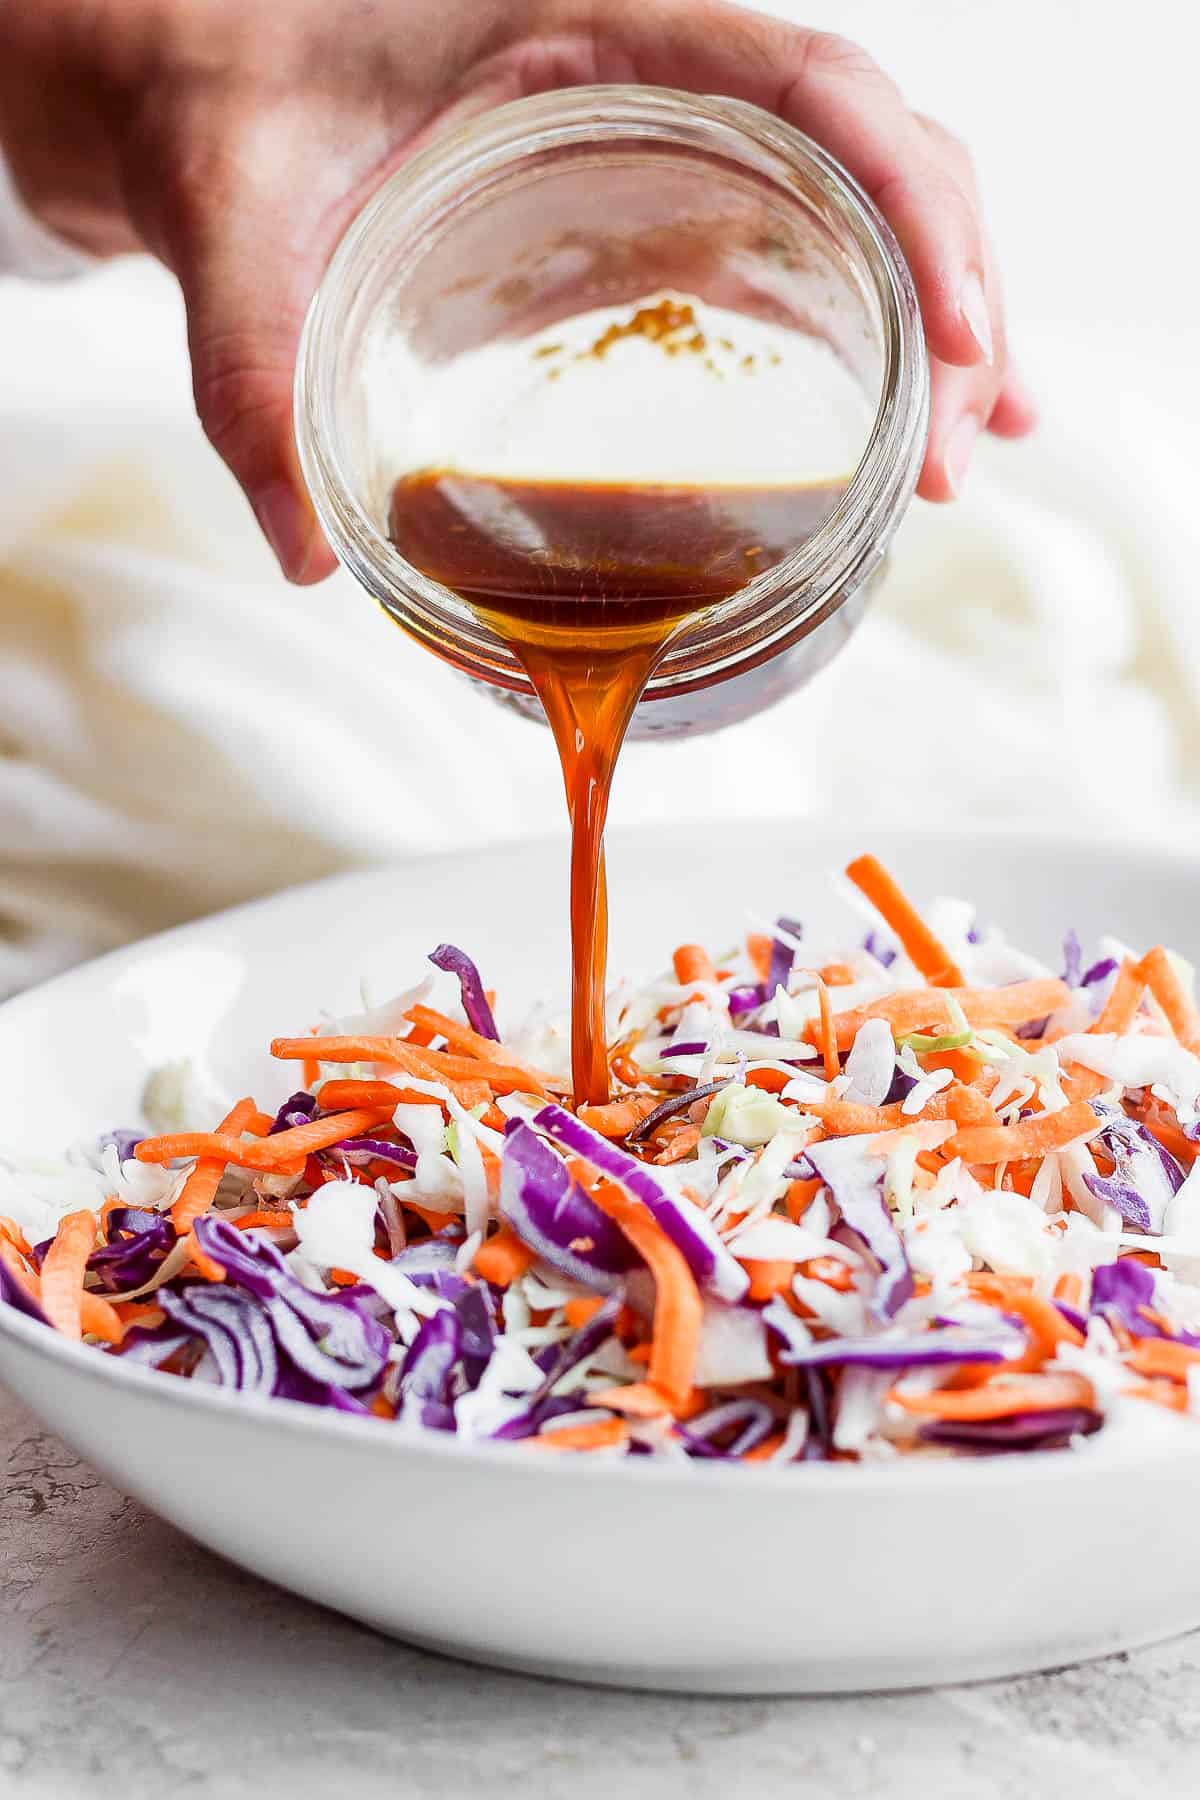 The sauce being poured from a mason jar onto the slaw ingredients.